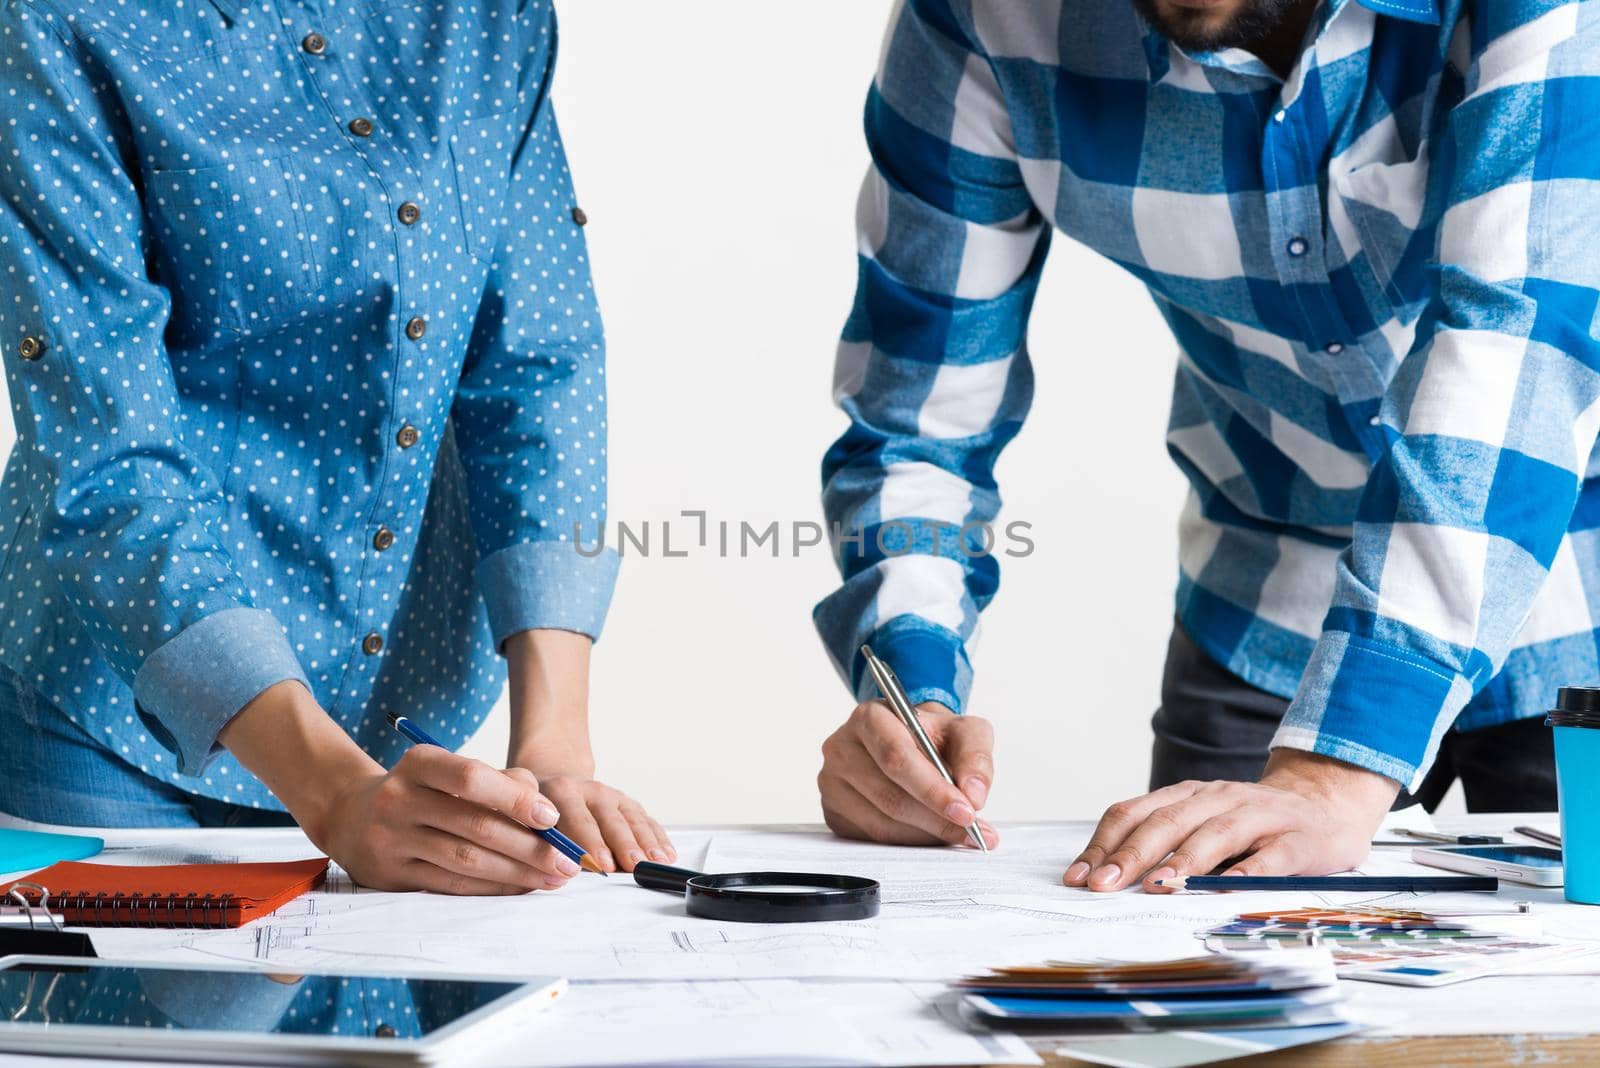 Man writing with pen on technical drawing. Creative team of designers together working with construction blueprint. Thorough study and approval of design project. Architecture studio concept.